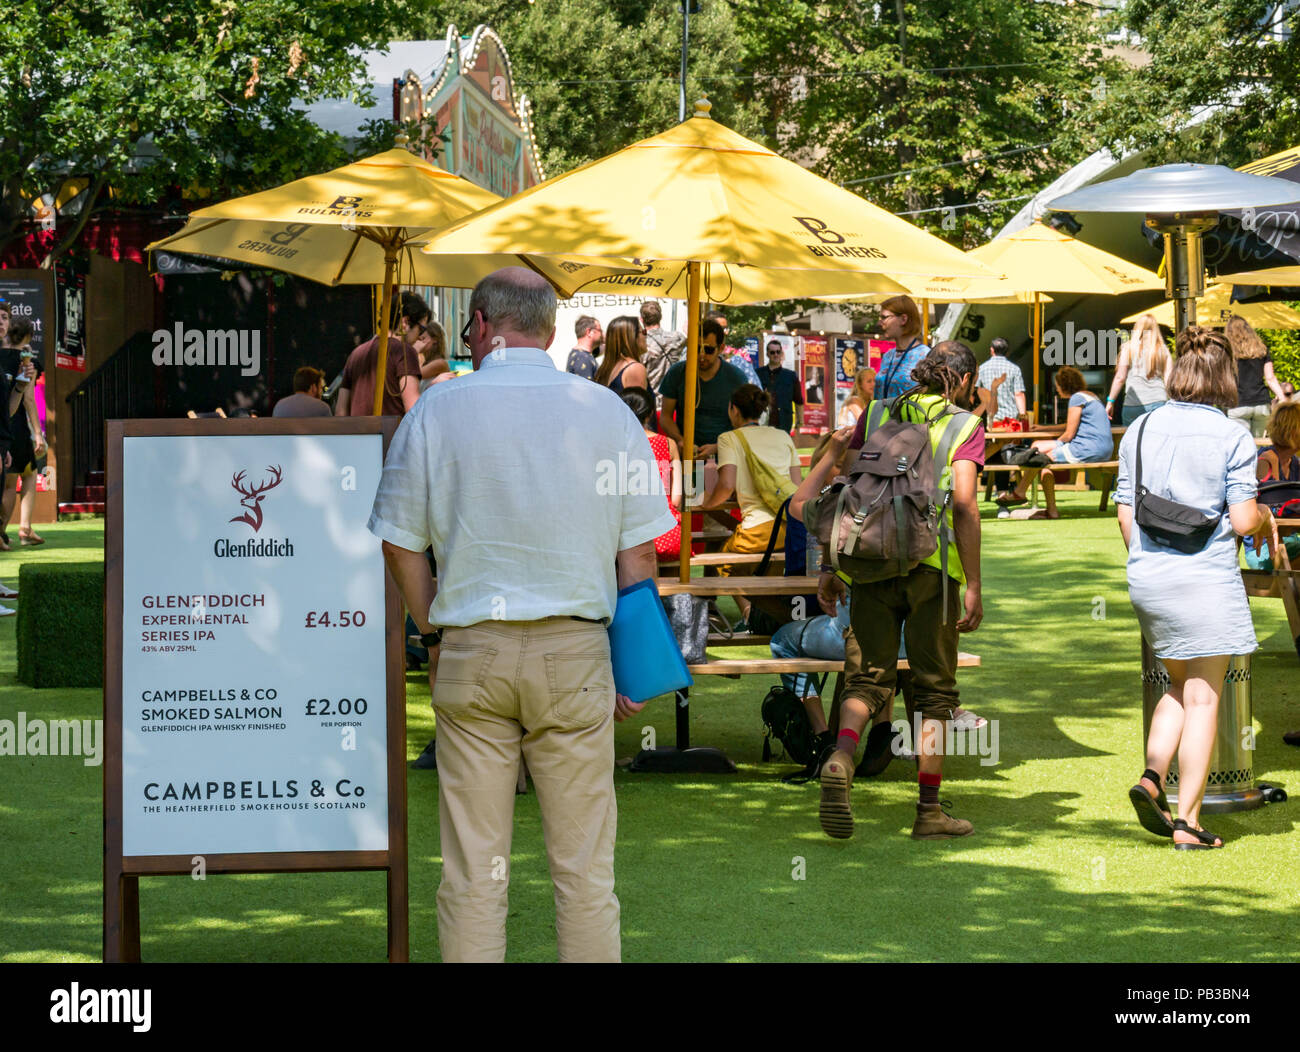 Edinburgh, UK. 26th July 2018. Edinburgh Food Festival 2018 in George Square Gardens, Edinburgh, Scotland, United Kingdom. There are food stalls  with over 20 local food and drink producers in the free outdoor event. People enjoying the sunshine in George Square at the food festival sitting at picnic tables under sun umbrellas. A man looks at the menu for Glenfiddich whisky and smoked salmon Stock Photo